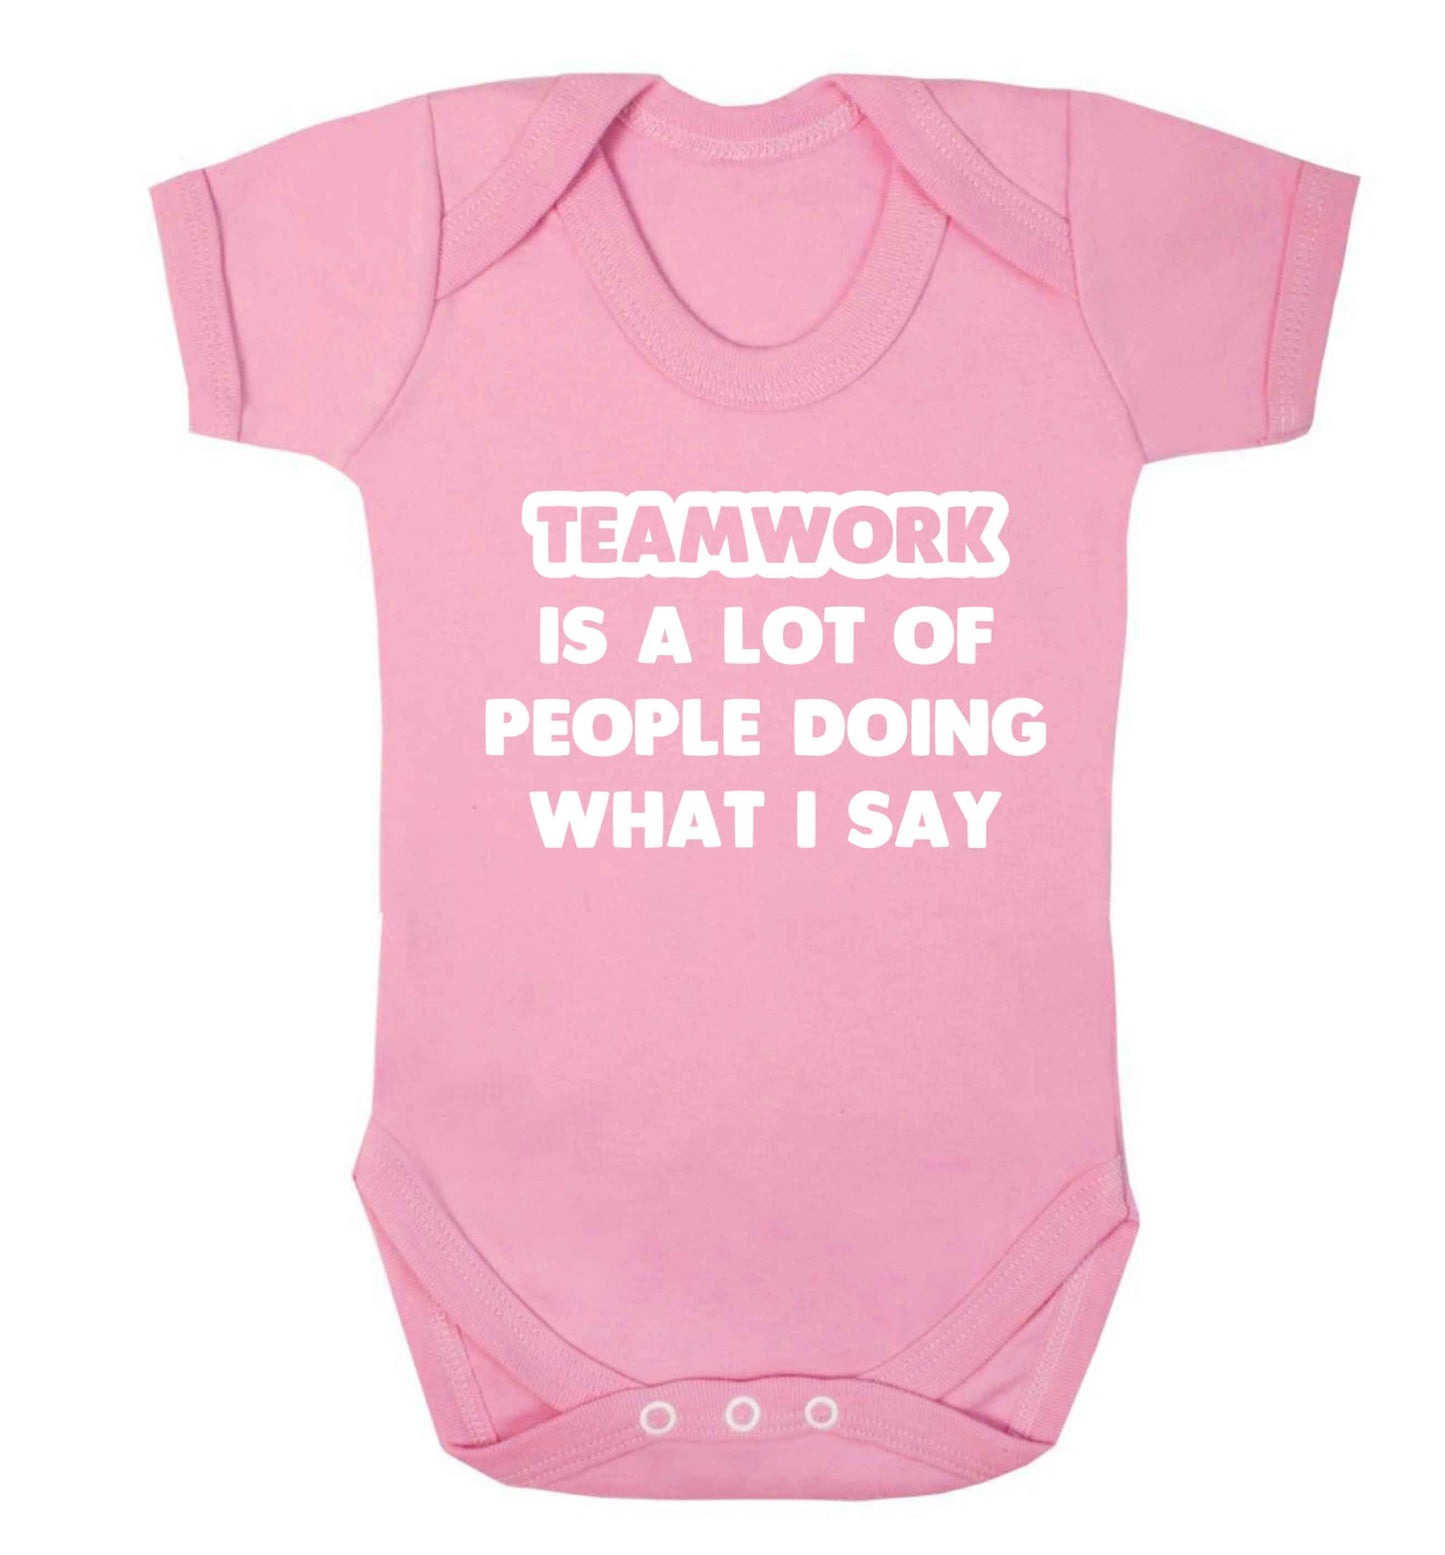 Teamwork is a lot of people doing what I say Baby Vest pale pink 18-24 months